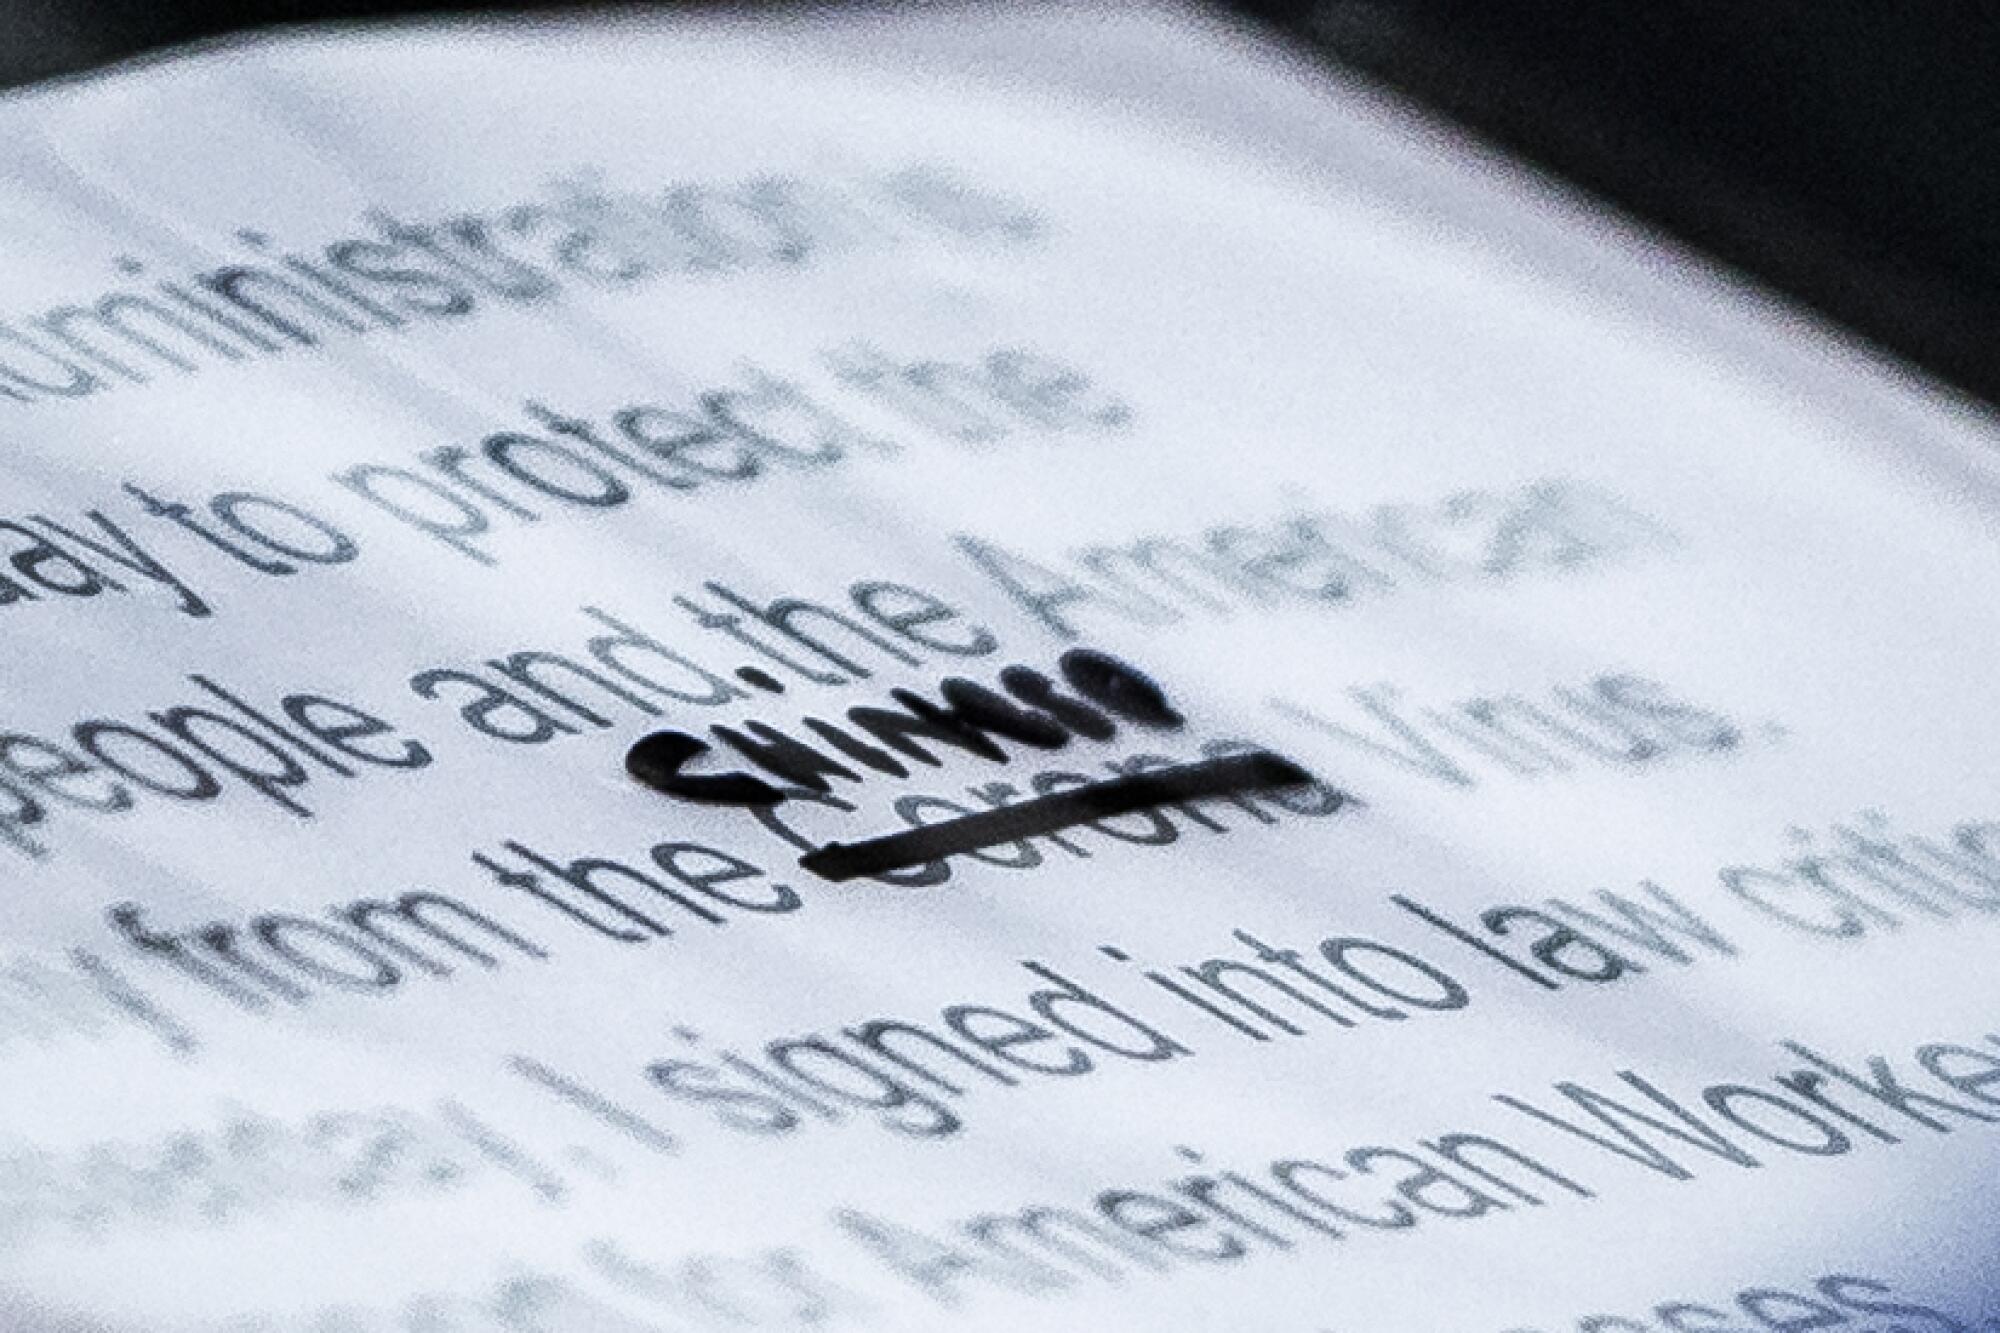 A close-up of President Trump's notes for a speech shows 'Corona' crossed out in favor of 'Chinese' to describe the virus.